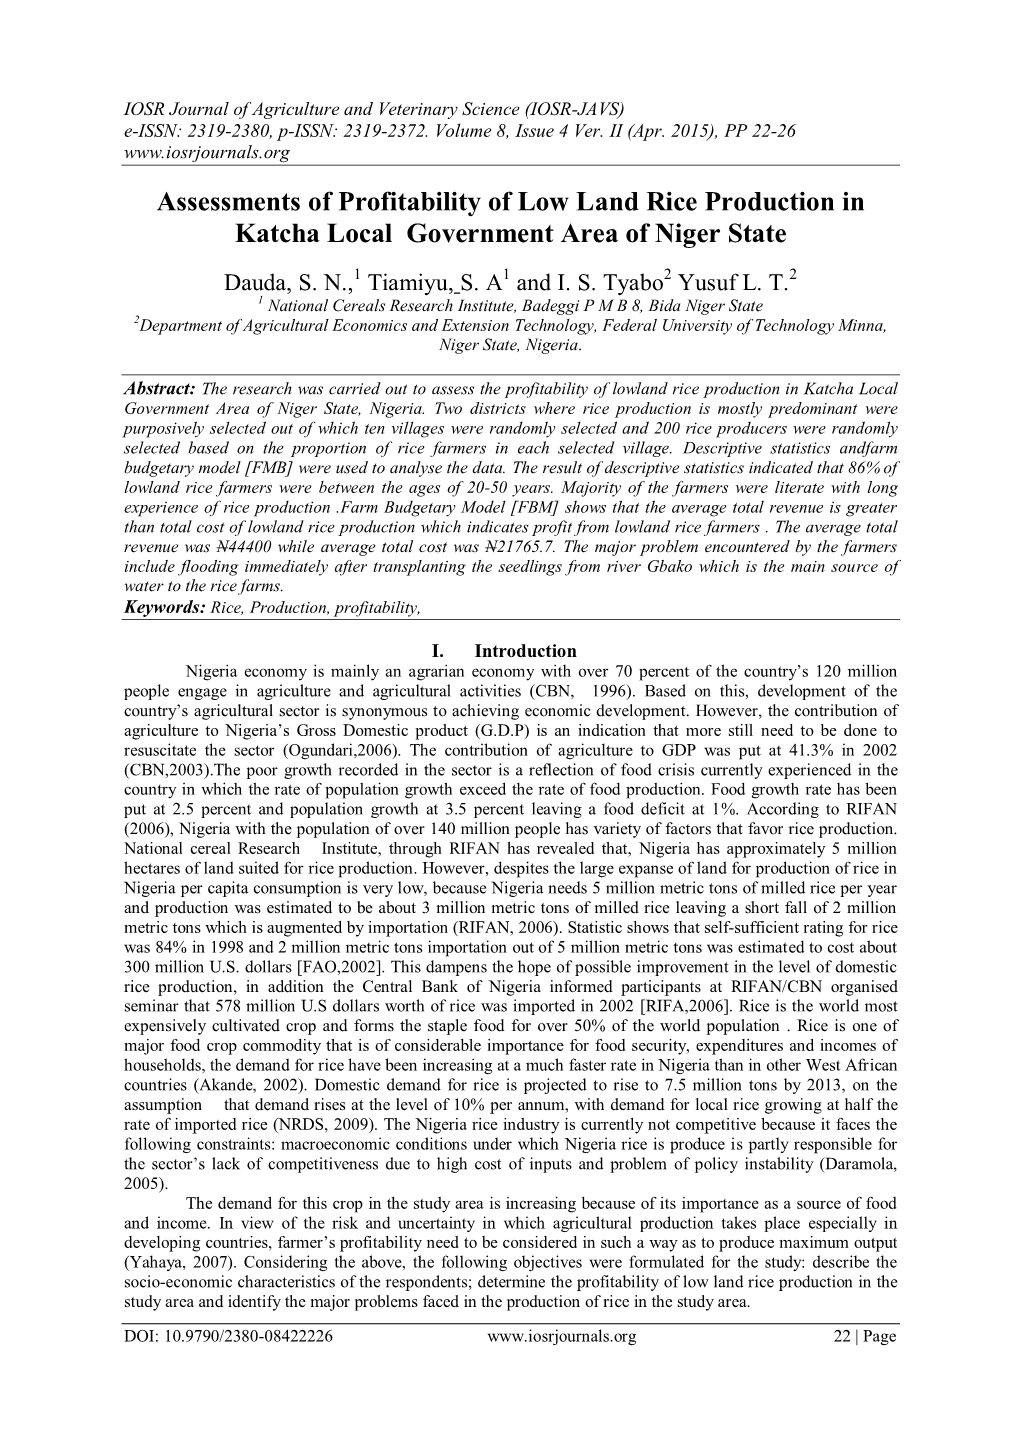 Assessments of Profitability of Low Land Rice Production in Katcha Local Government Area of Niger State